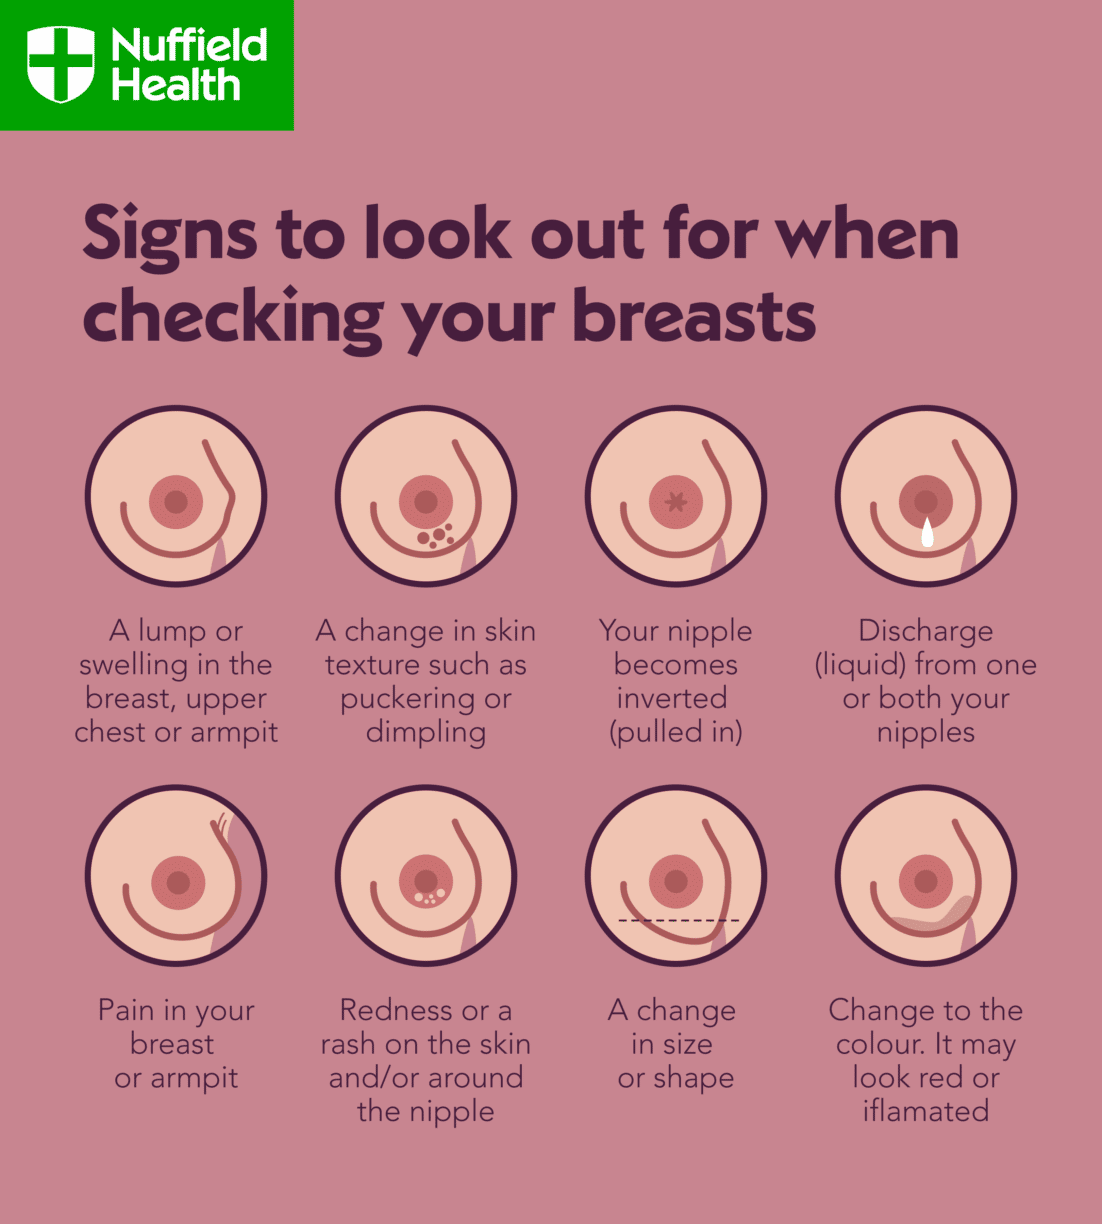 Breast cancer infographic